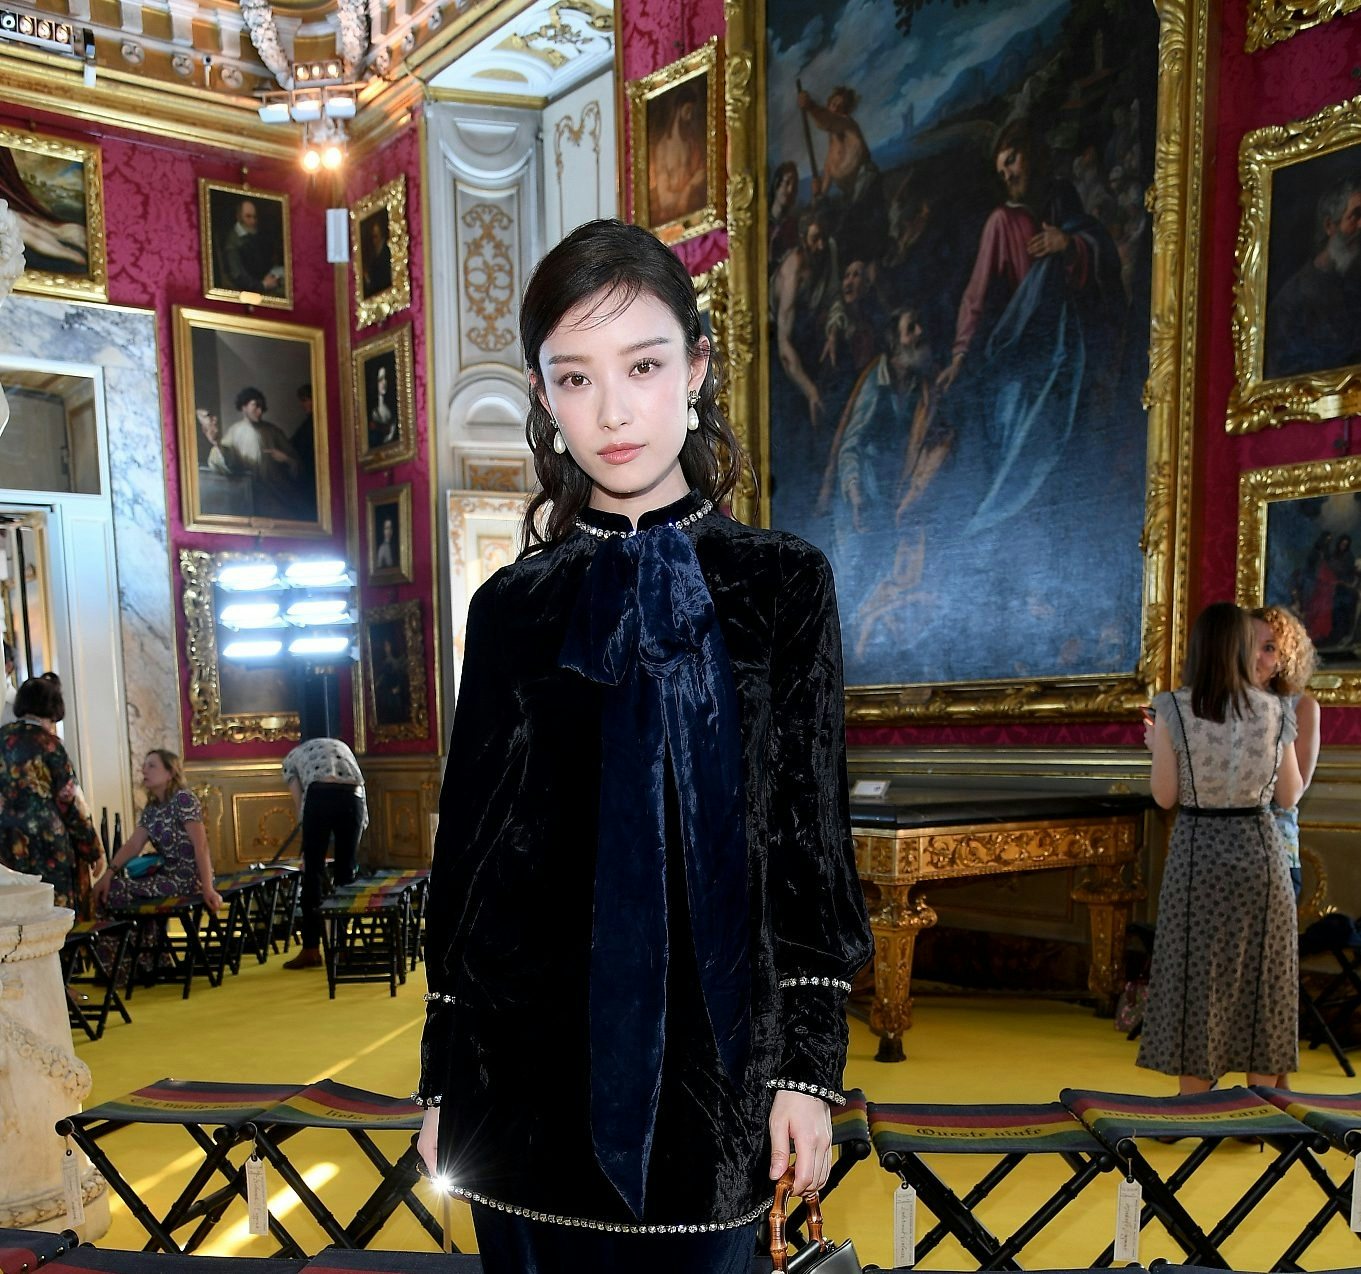 Chinese actress Ni Ni attends the Gucci Cruise 2018 fashion show at Palazzo Pitti on May 29, 2017 in Florence, Italy. (Image via VCG)